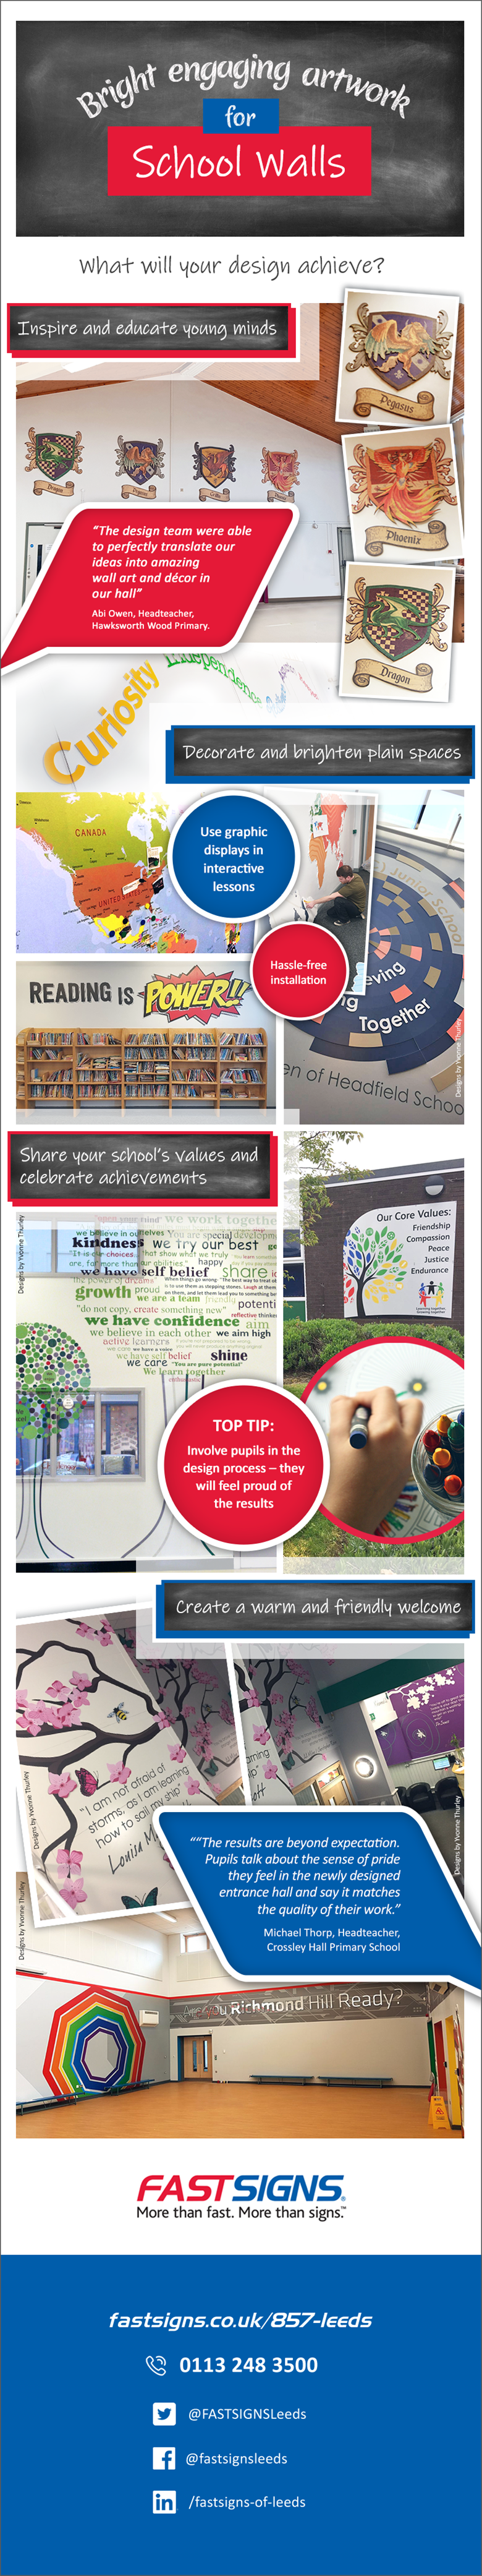 fastsigns-infographic-artwork-for-schools